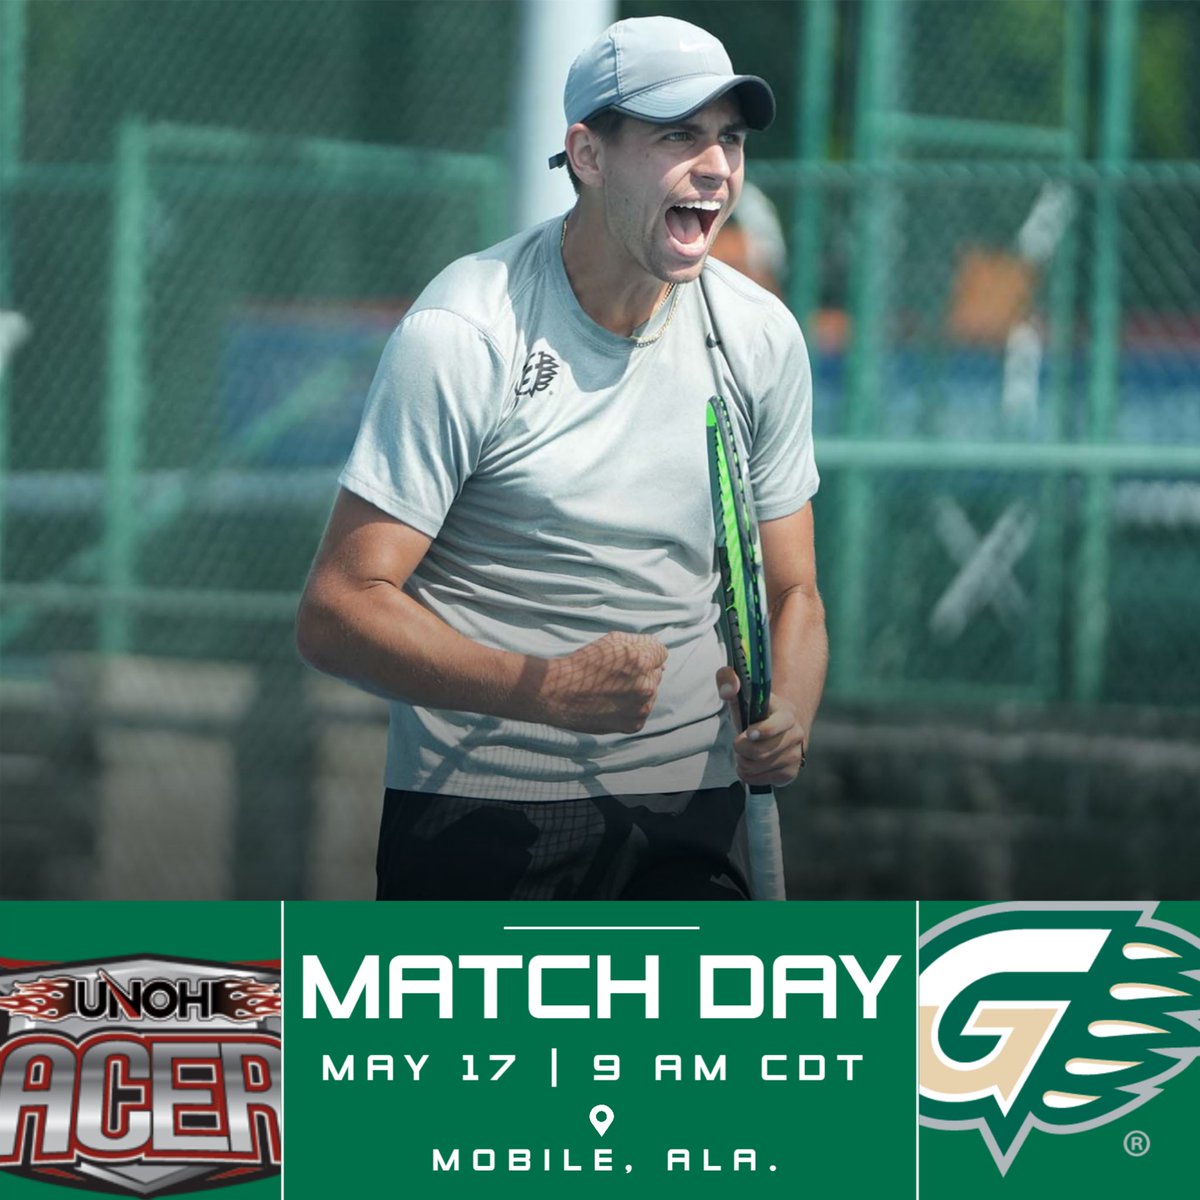 NATIONAL SEMIFINAL! Grizzlies seek a spot in the NAIA national championship match this morning against No. 4 seed Northwestern Ohio. 🎾 - 9AM CDT 📍 - Mobile, Ala. (Mobile Tennis Center) #GGCAthletics | #BattleForTheRedBanner